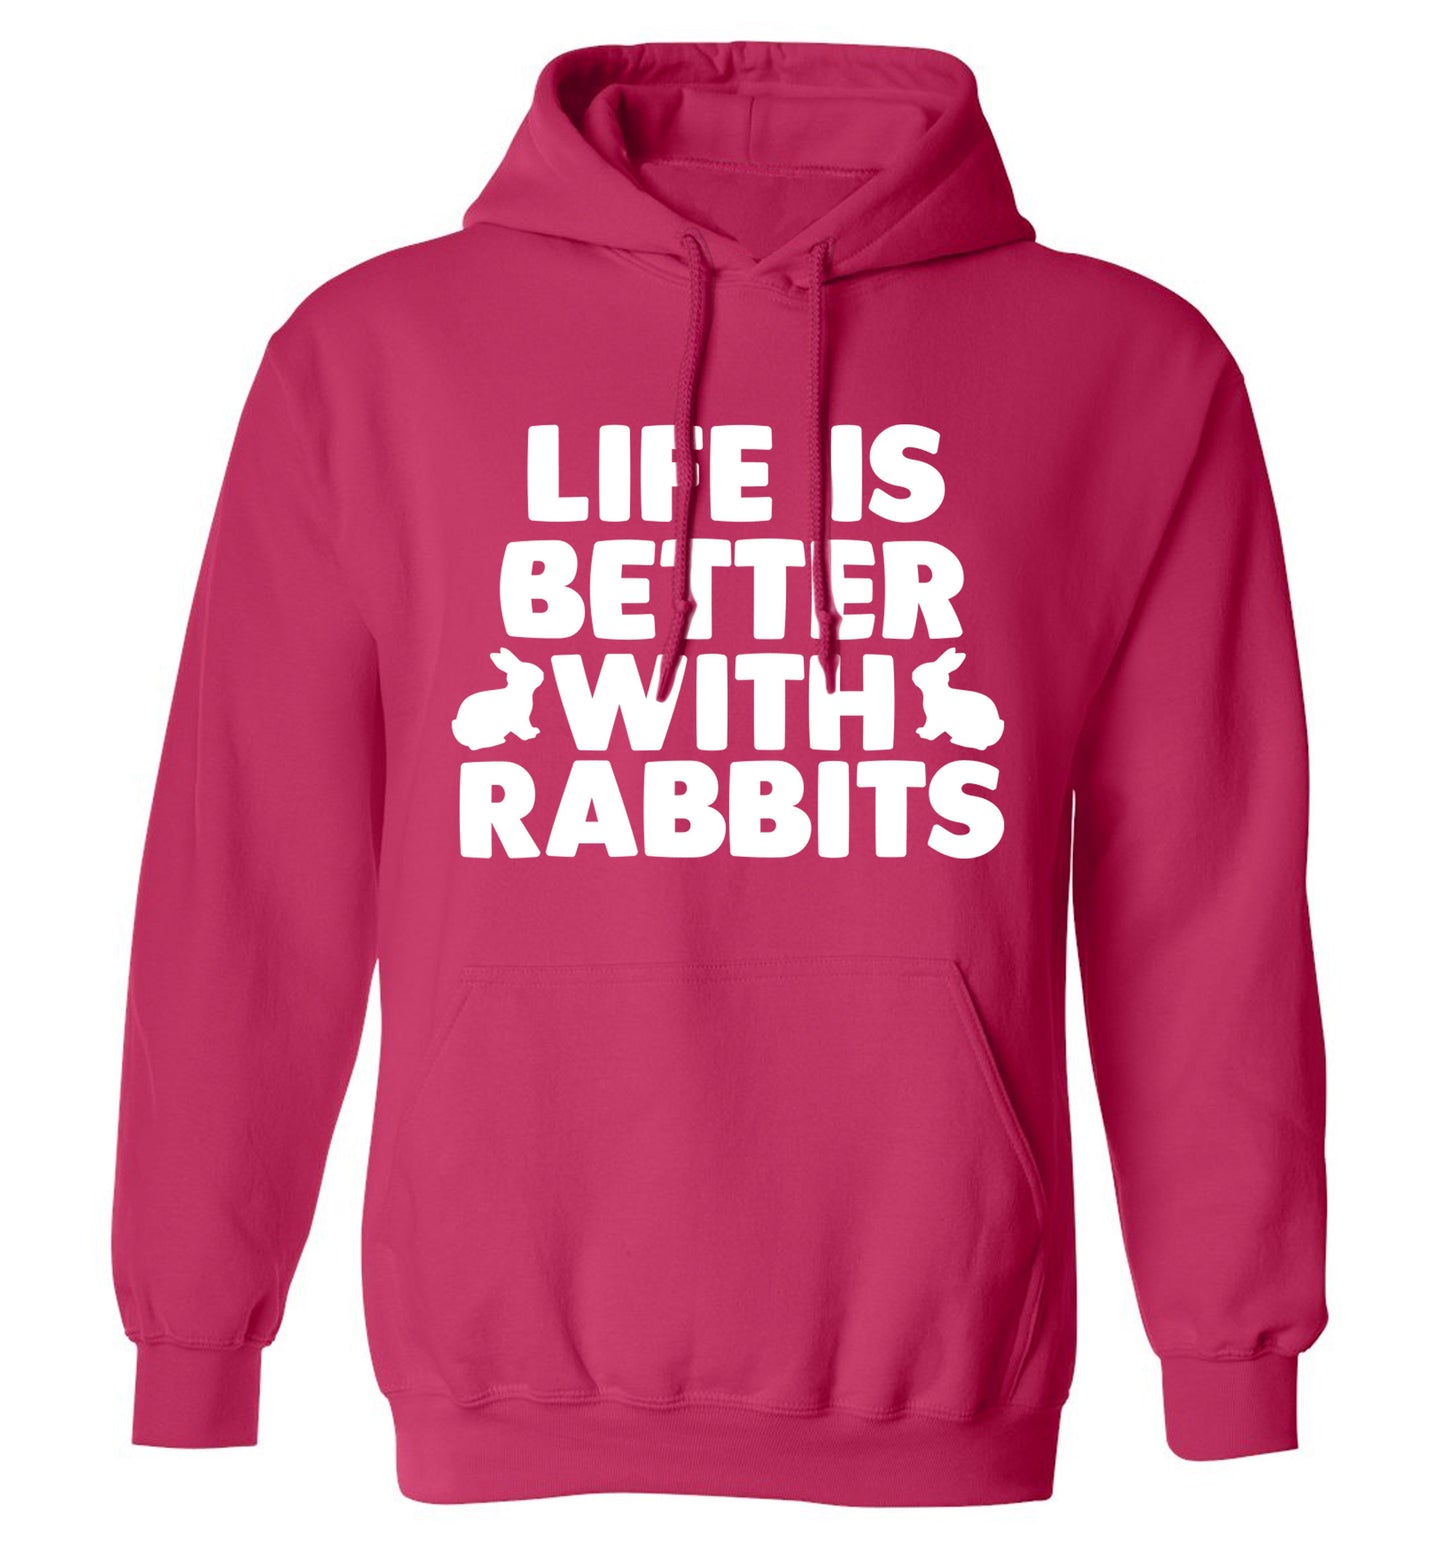 Life is better with rabbits adults unisex pink hoodie 2XL